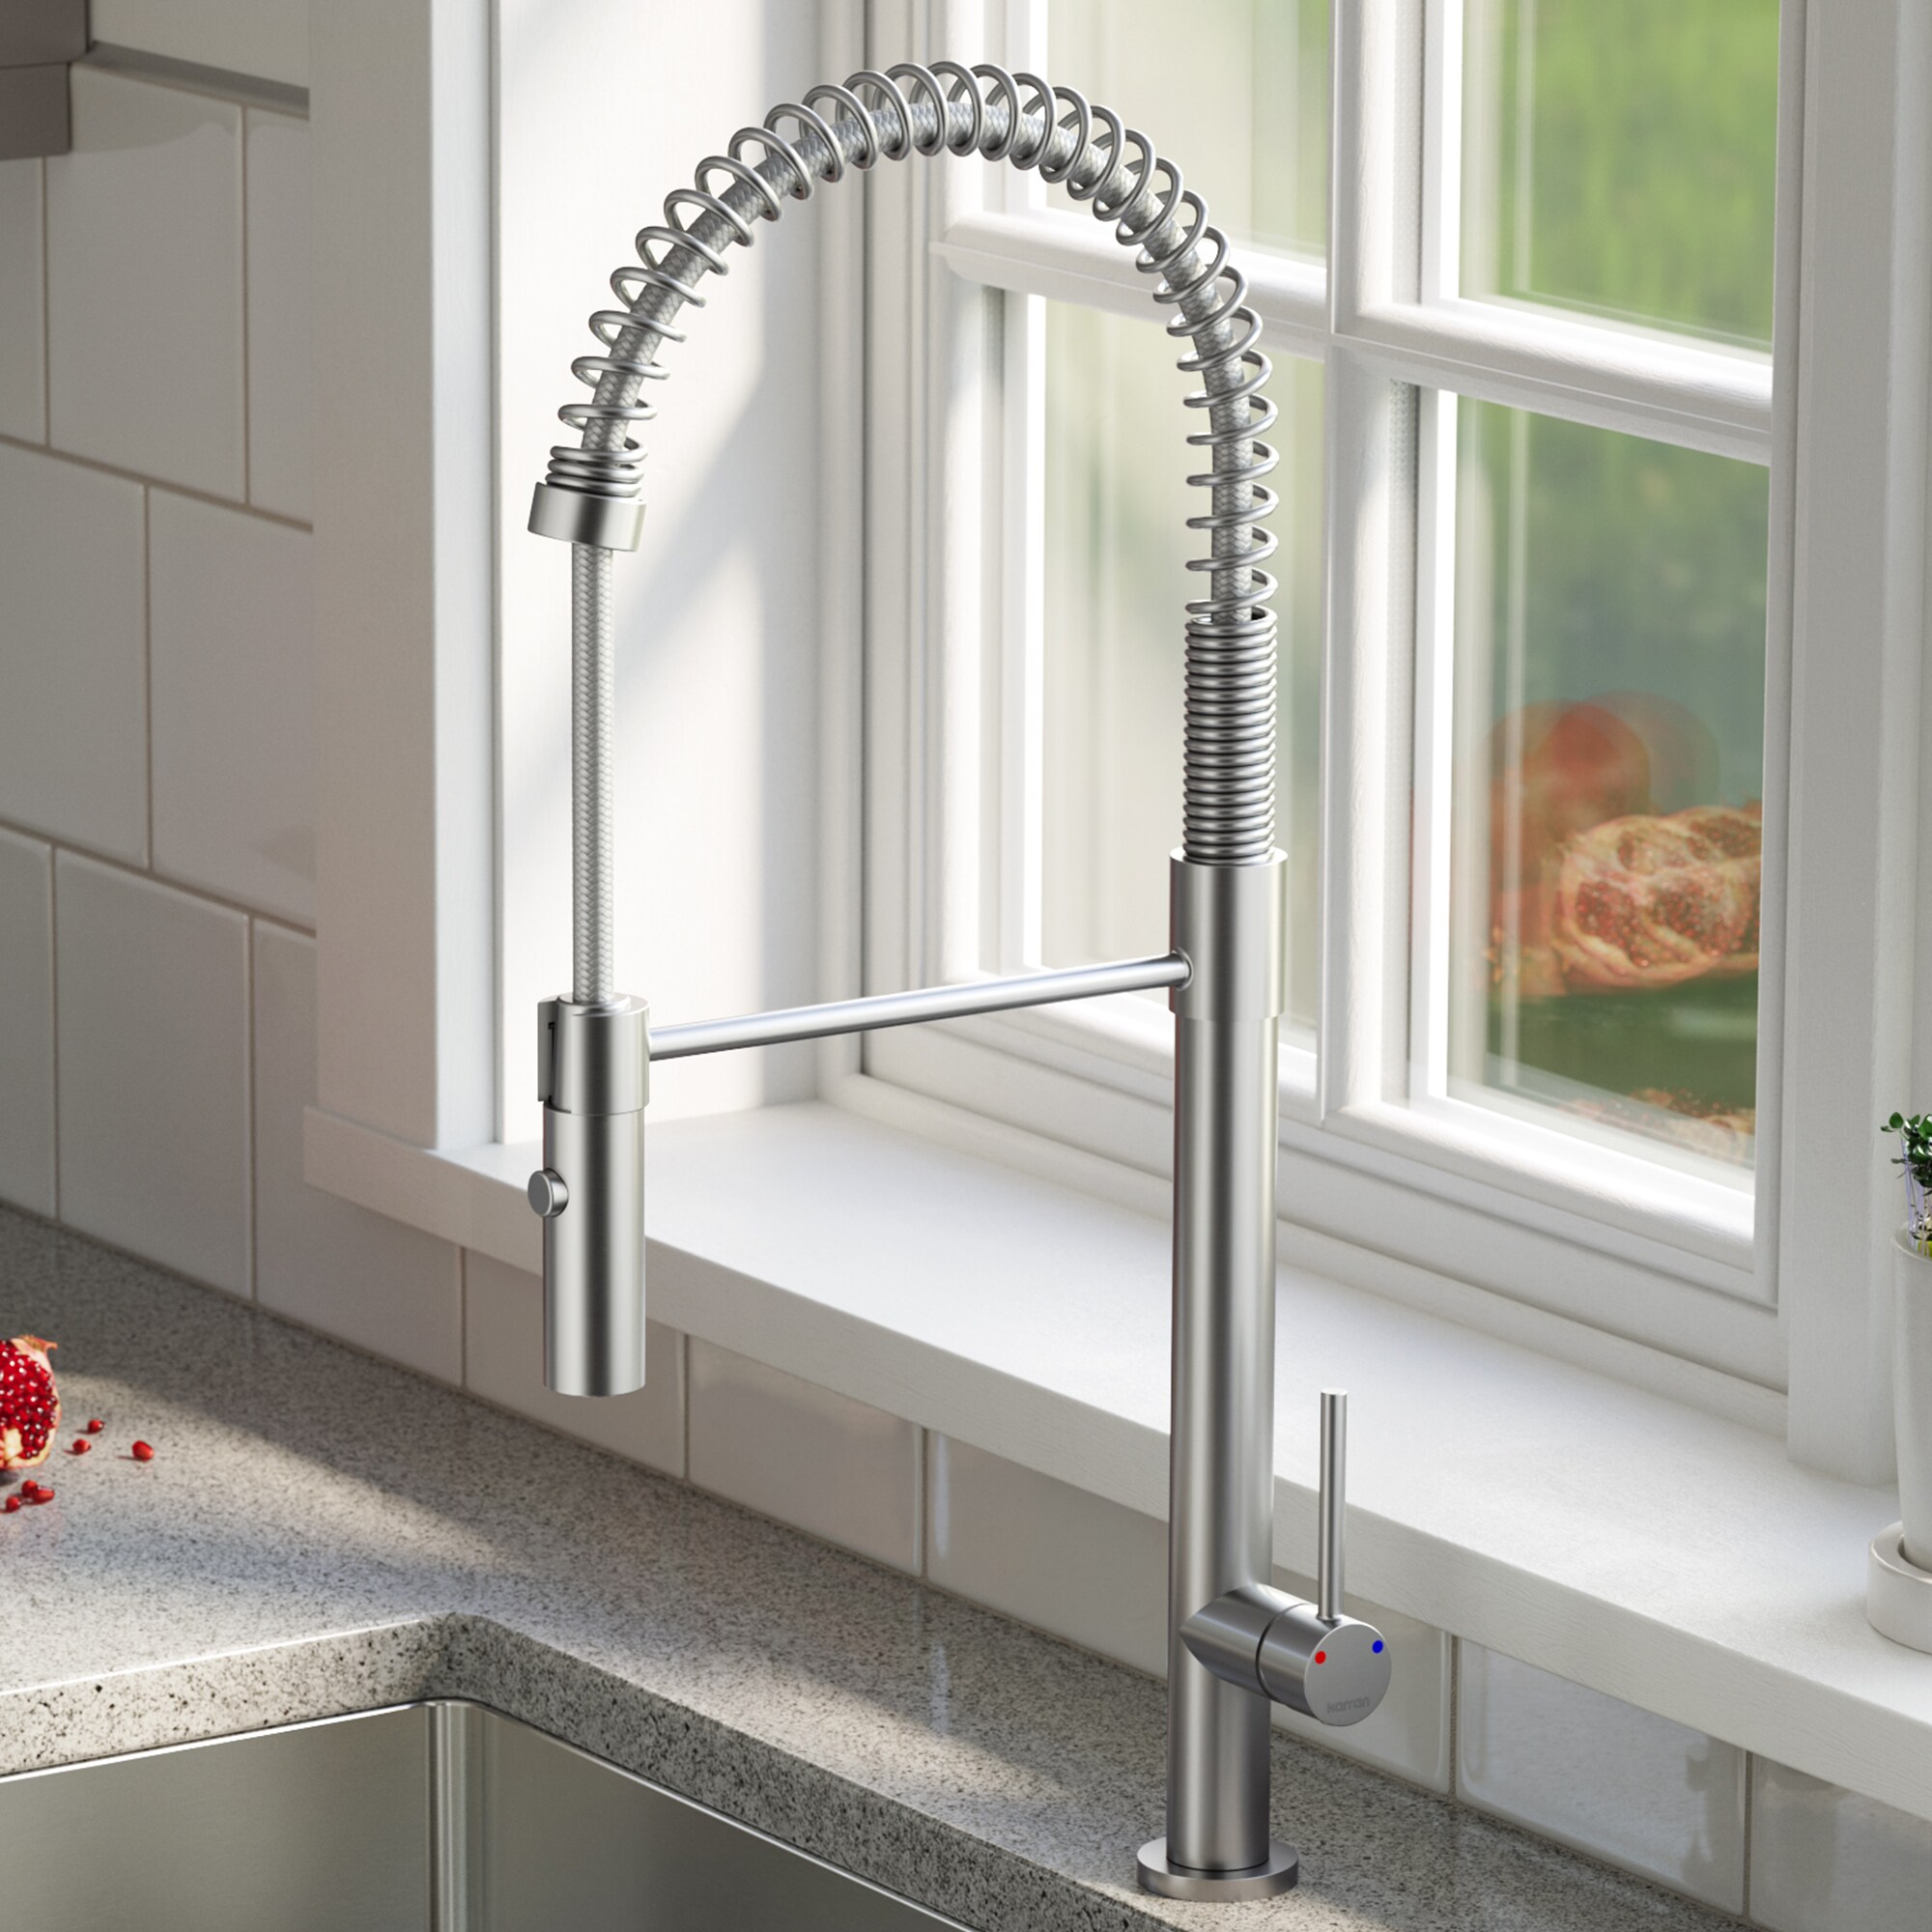 Karran Bluffton Stainless Steel Single Handle Pull-down Kitchen Faucet with Sprayer Function